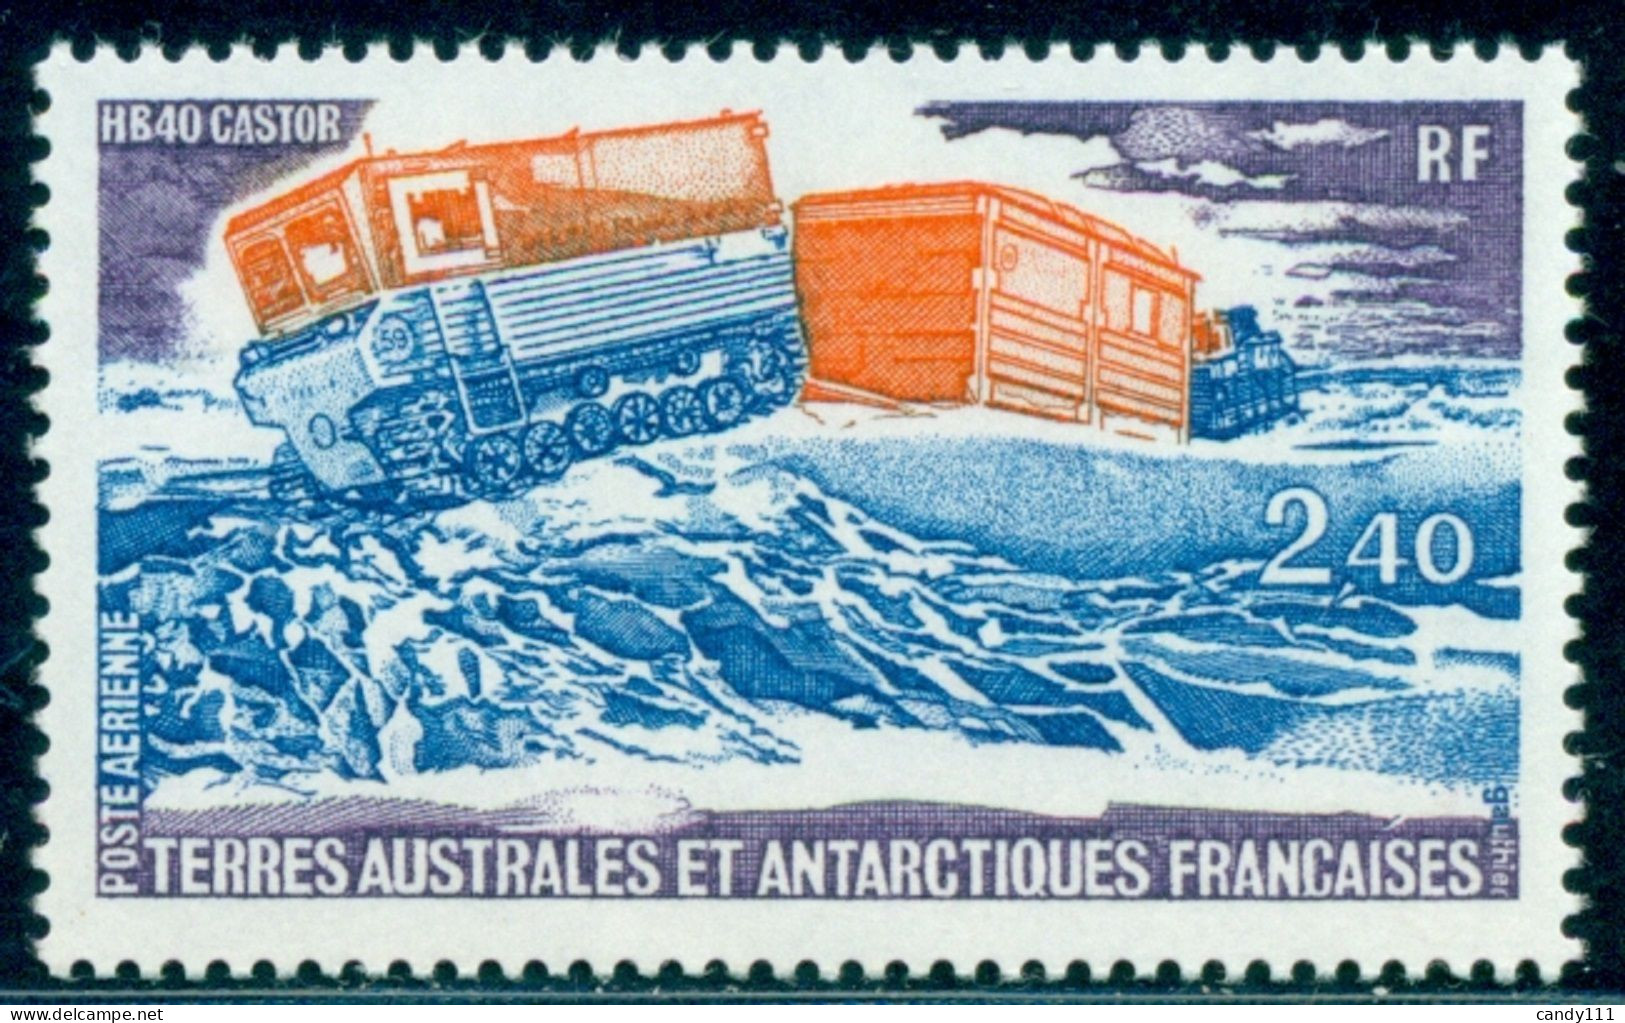 1980 Antarctic Research Tracked Vehicle HB 40 Castor, TAAF,Mi.154,MNH - Otros (Tierra)